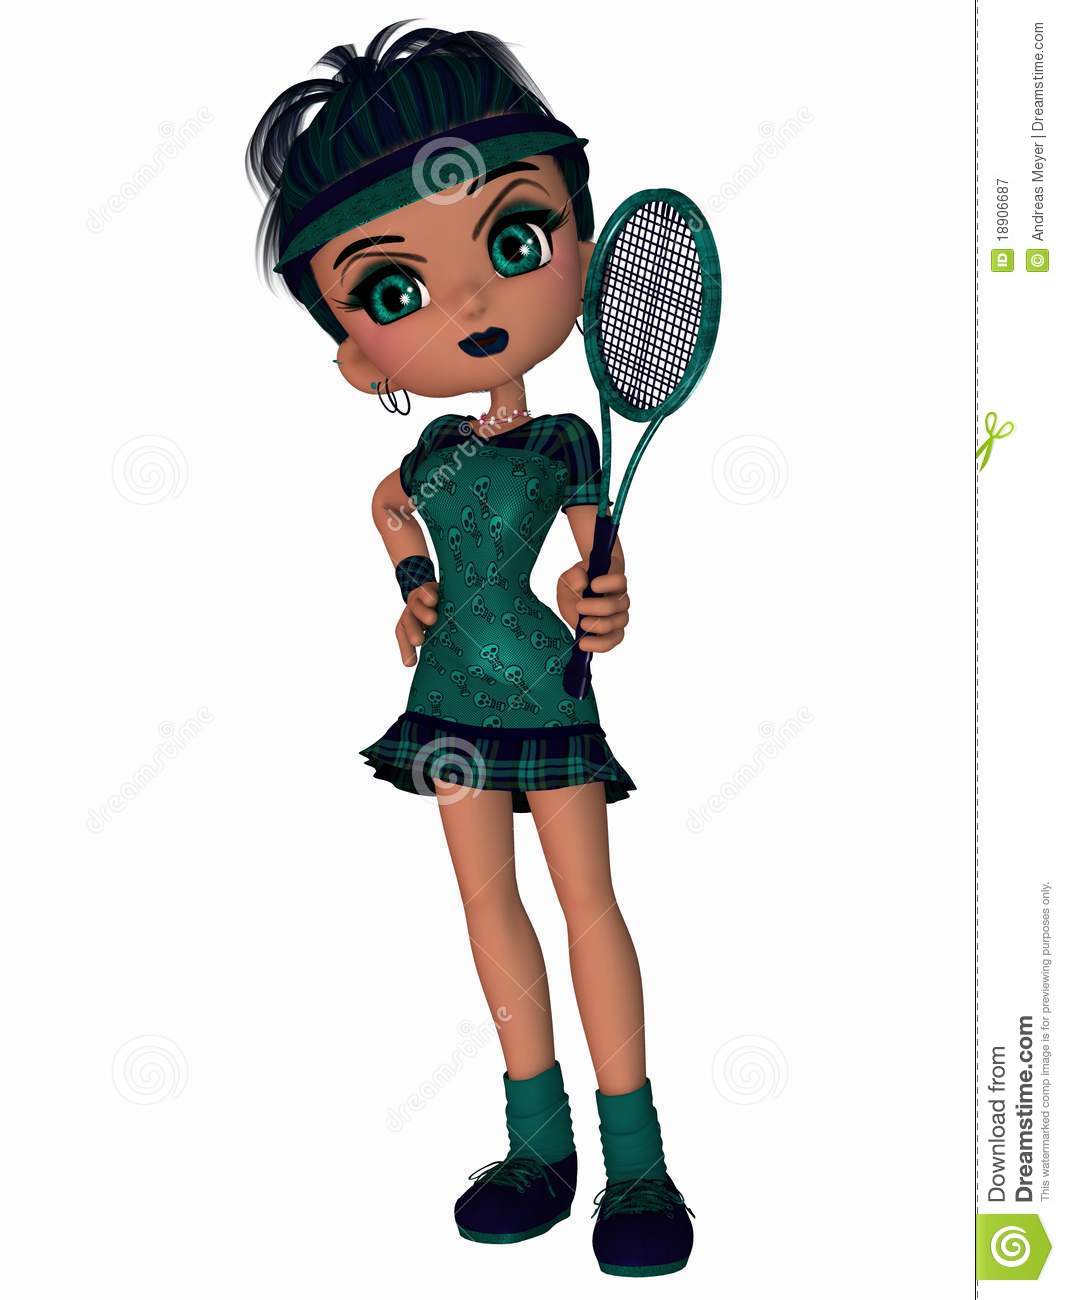 Cute Tennis Player Royalty Free Stock Photography   Image  18906687